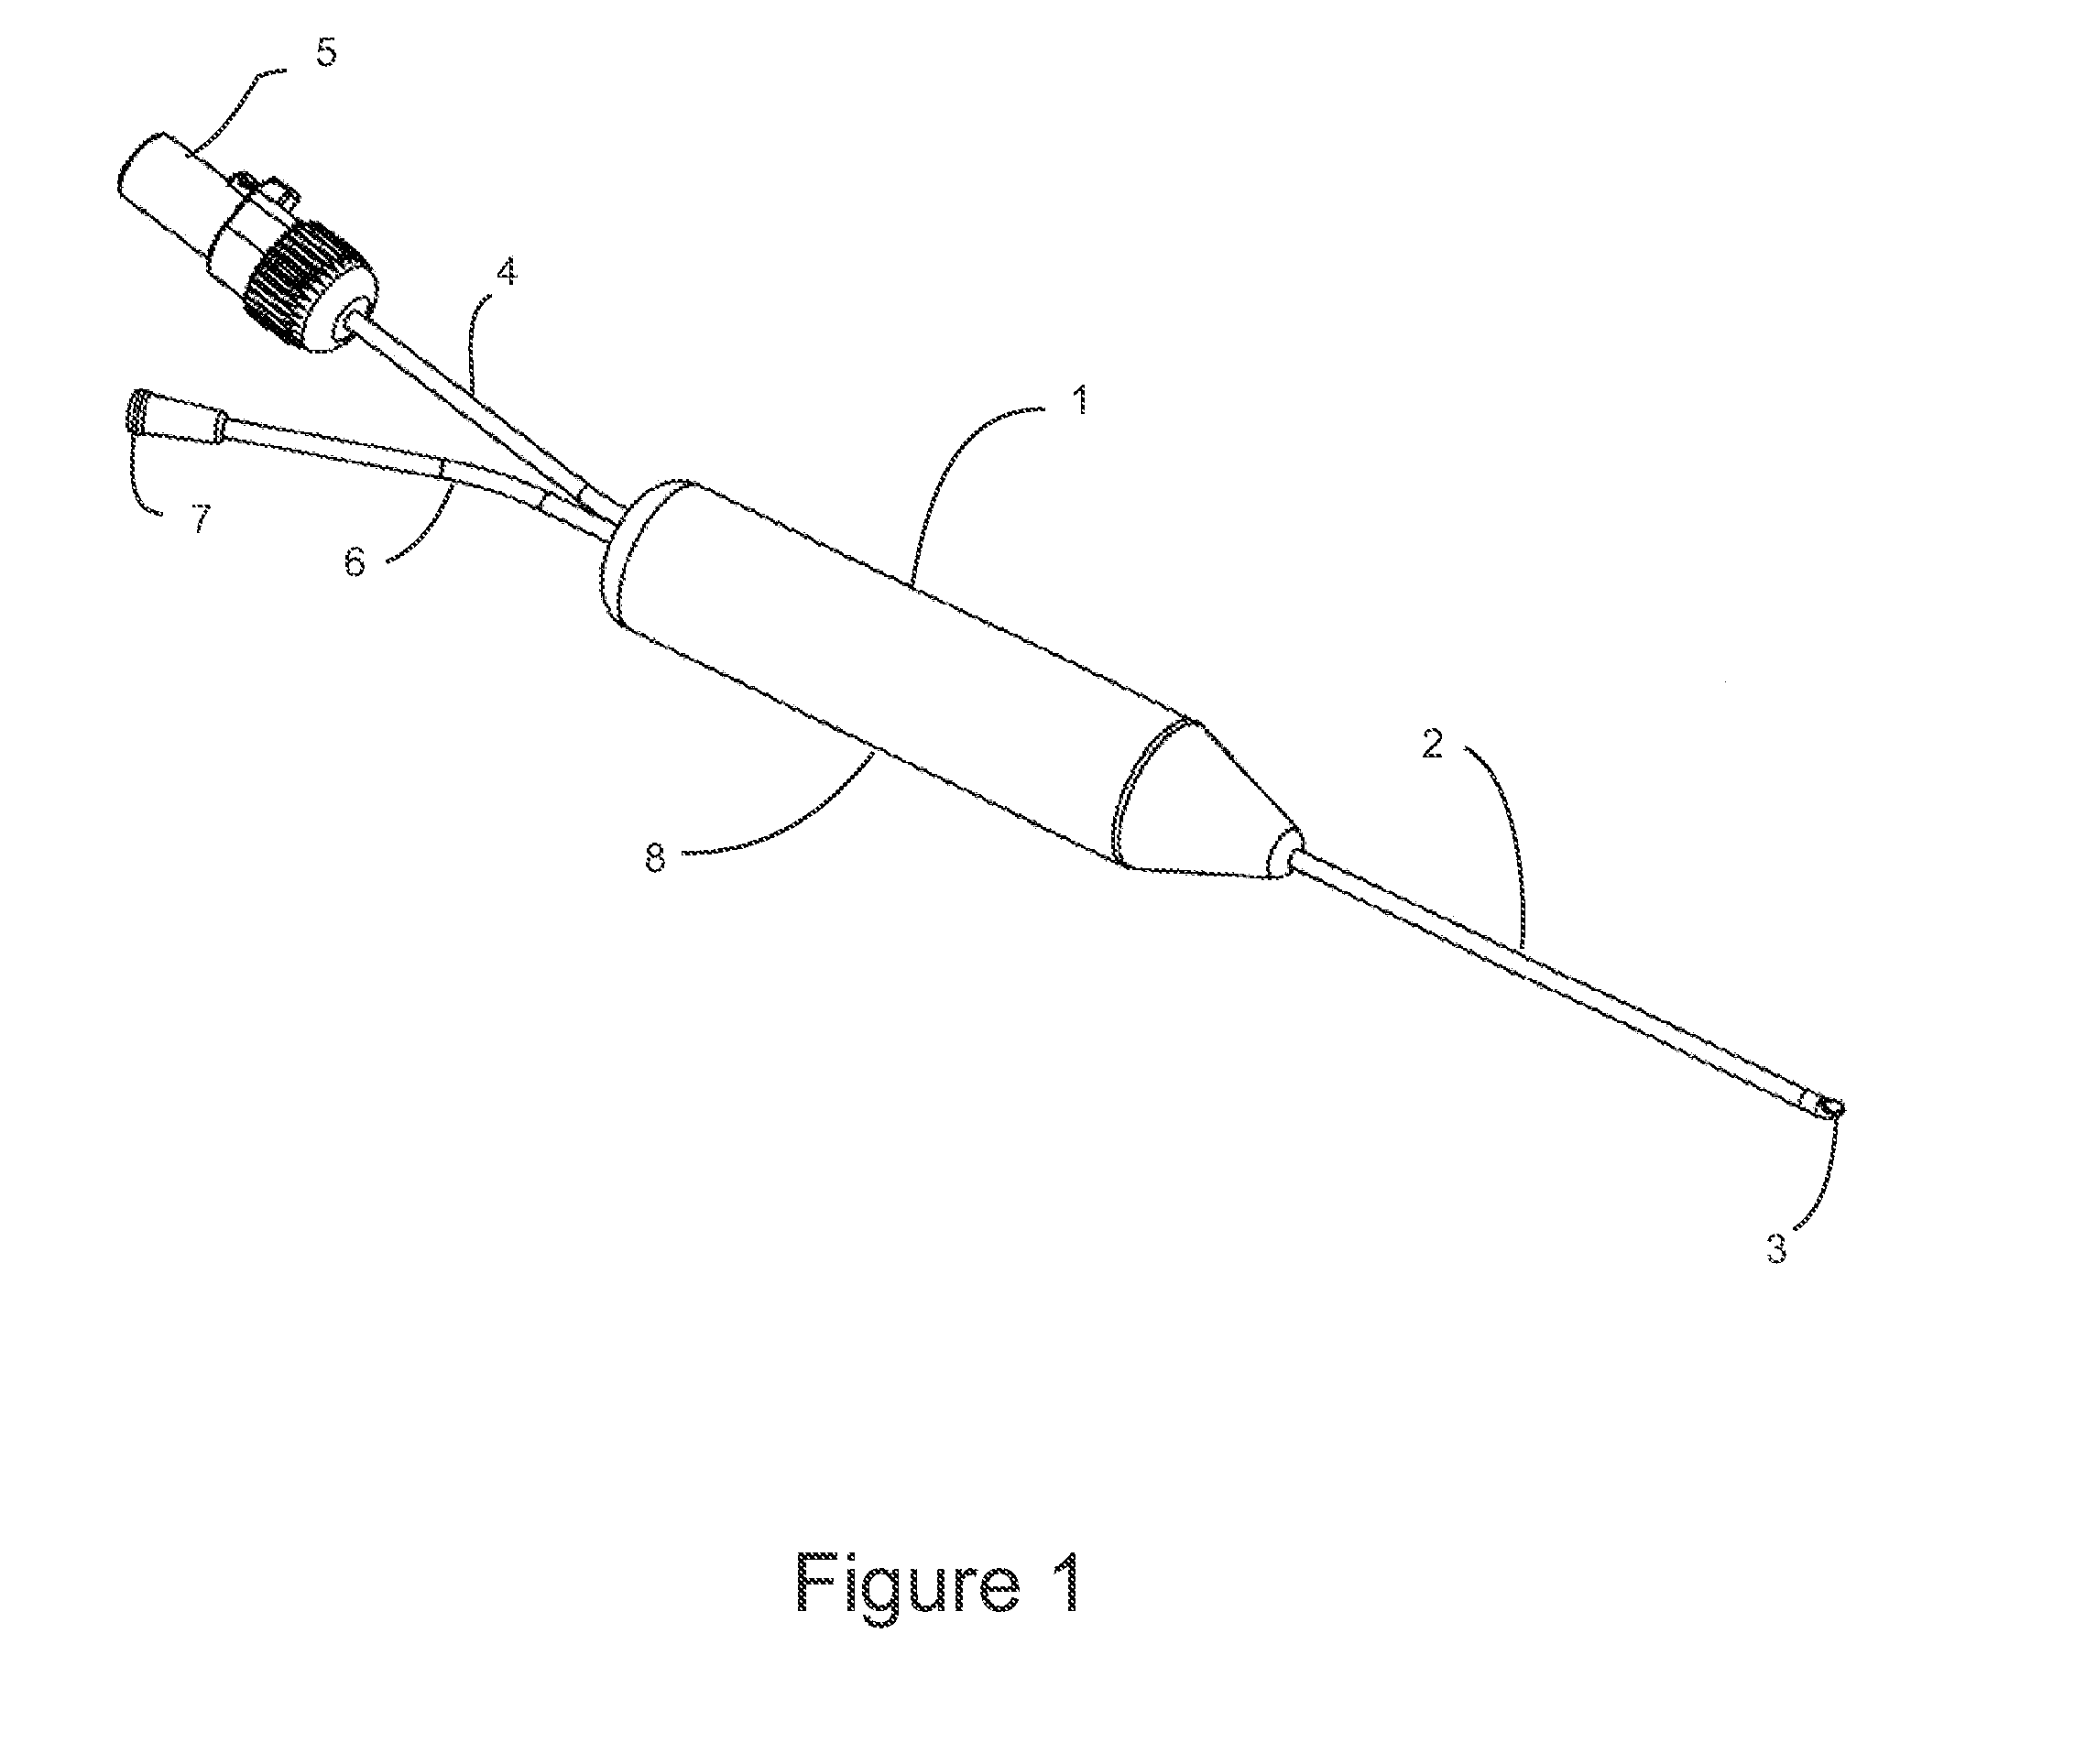 Direct vision cryosurgical probe and methods of use